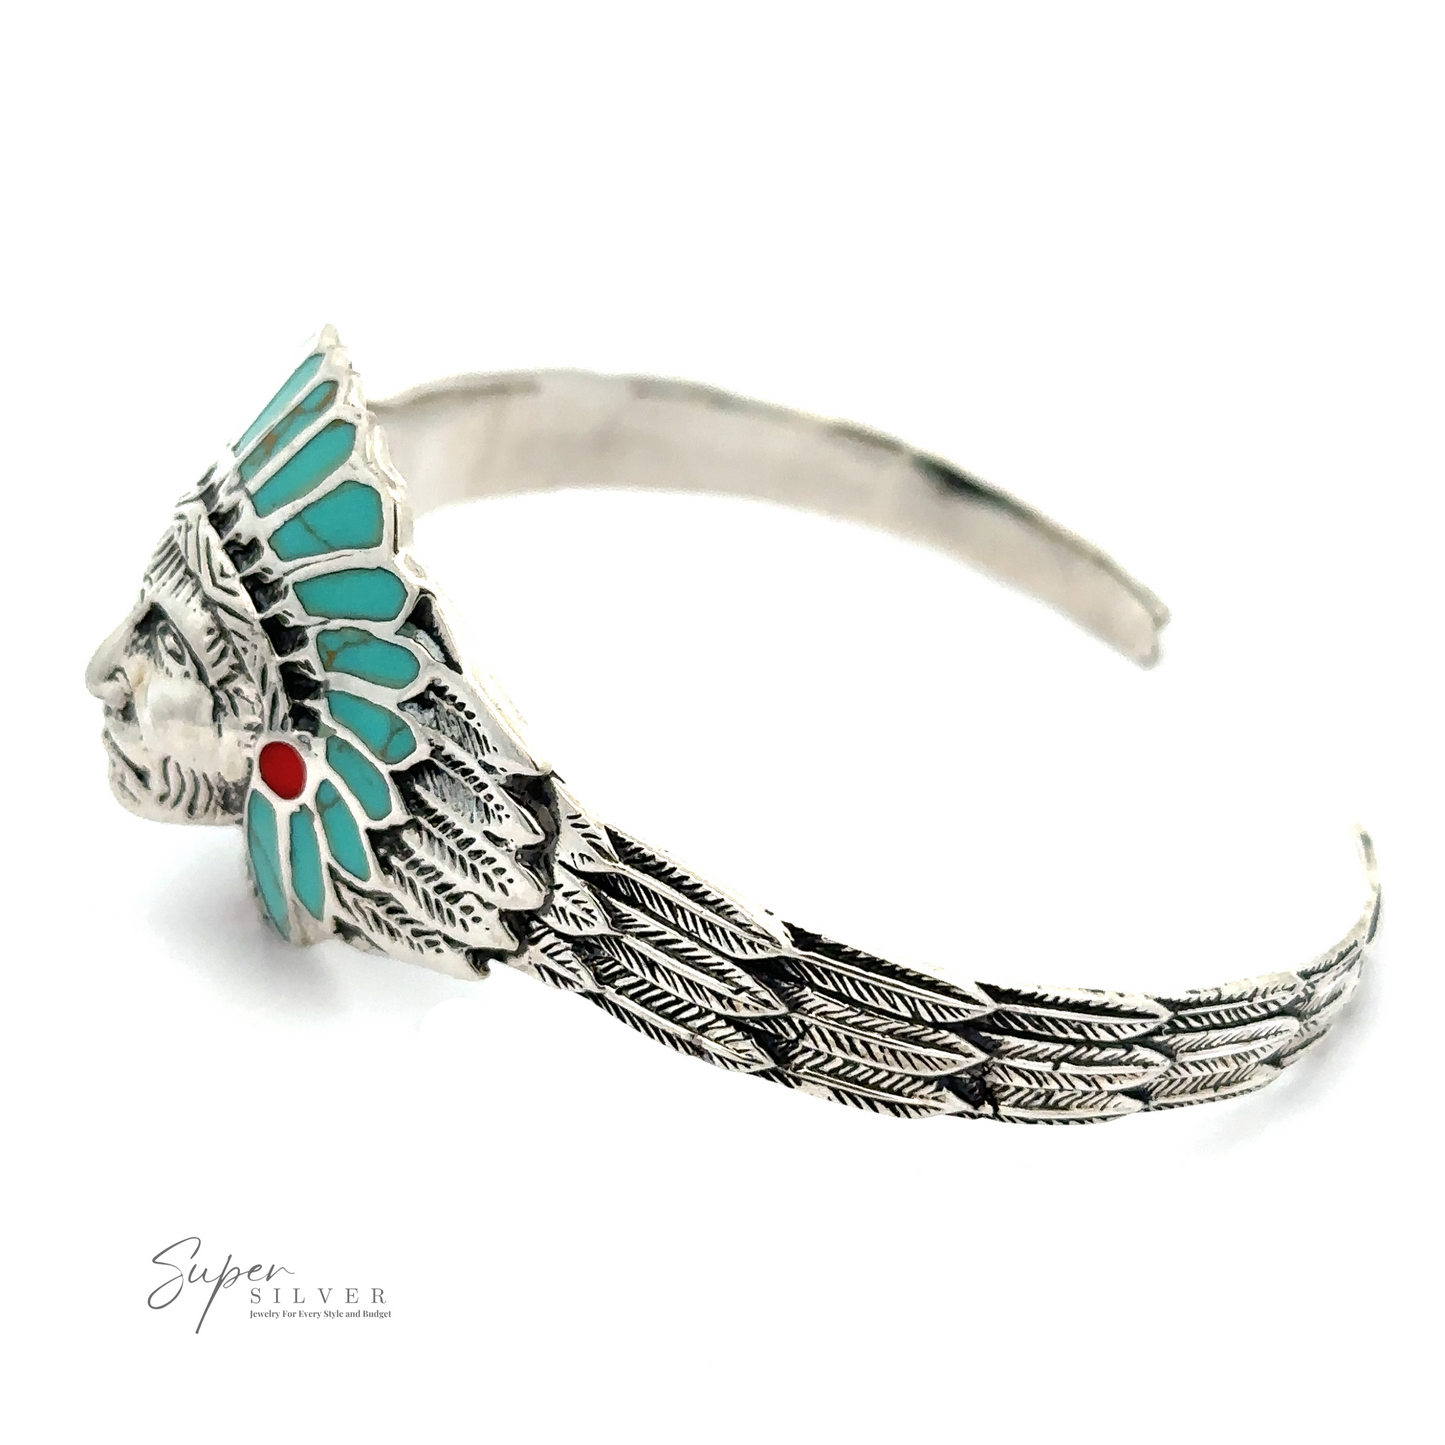 
                  
                    A silver Chief Head Inlay Stone Cuff featuring an intricately carved chief head motif wearing a feathered headdress with turquoise and red accents. The band celebrates Native American heritage with its decorative feather pattern. "Super Silver" logo is visible on the left.
                  
                